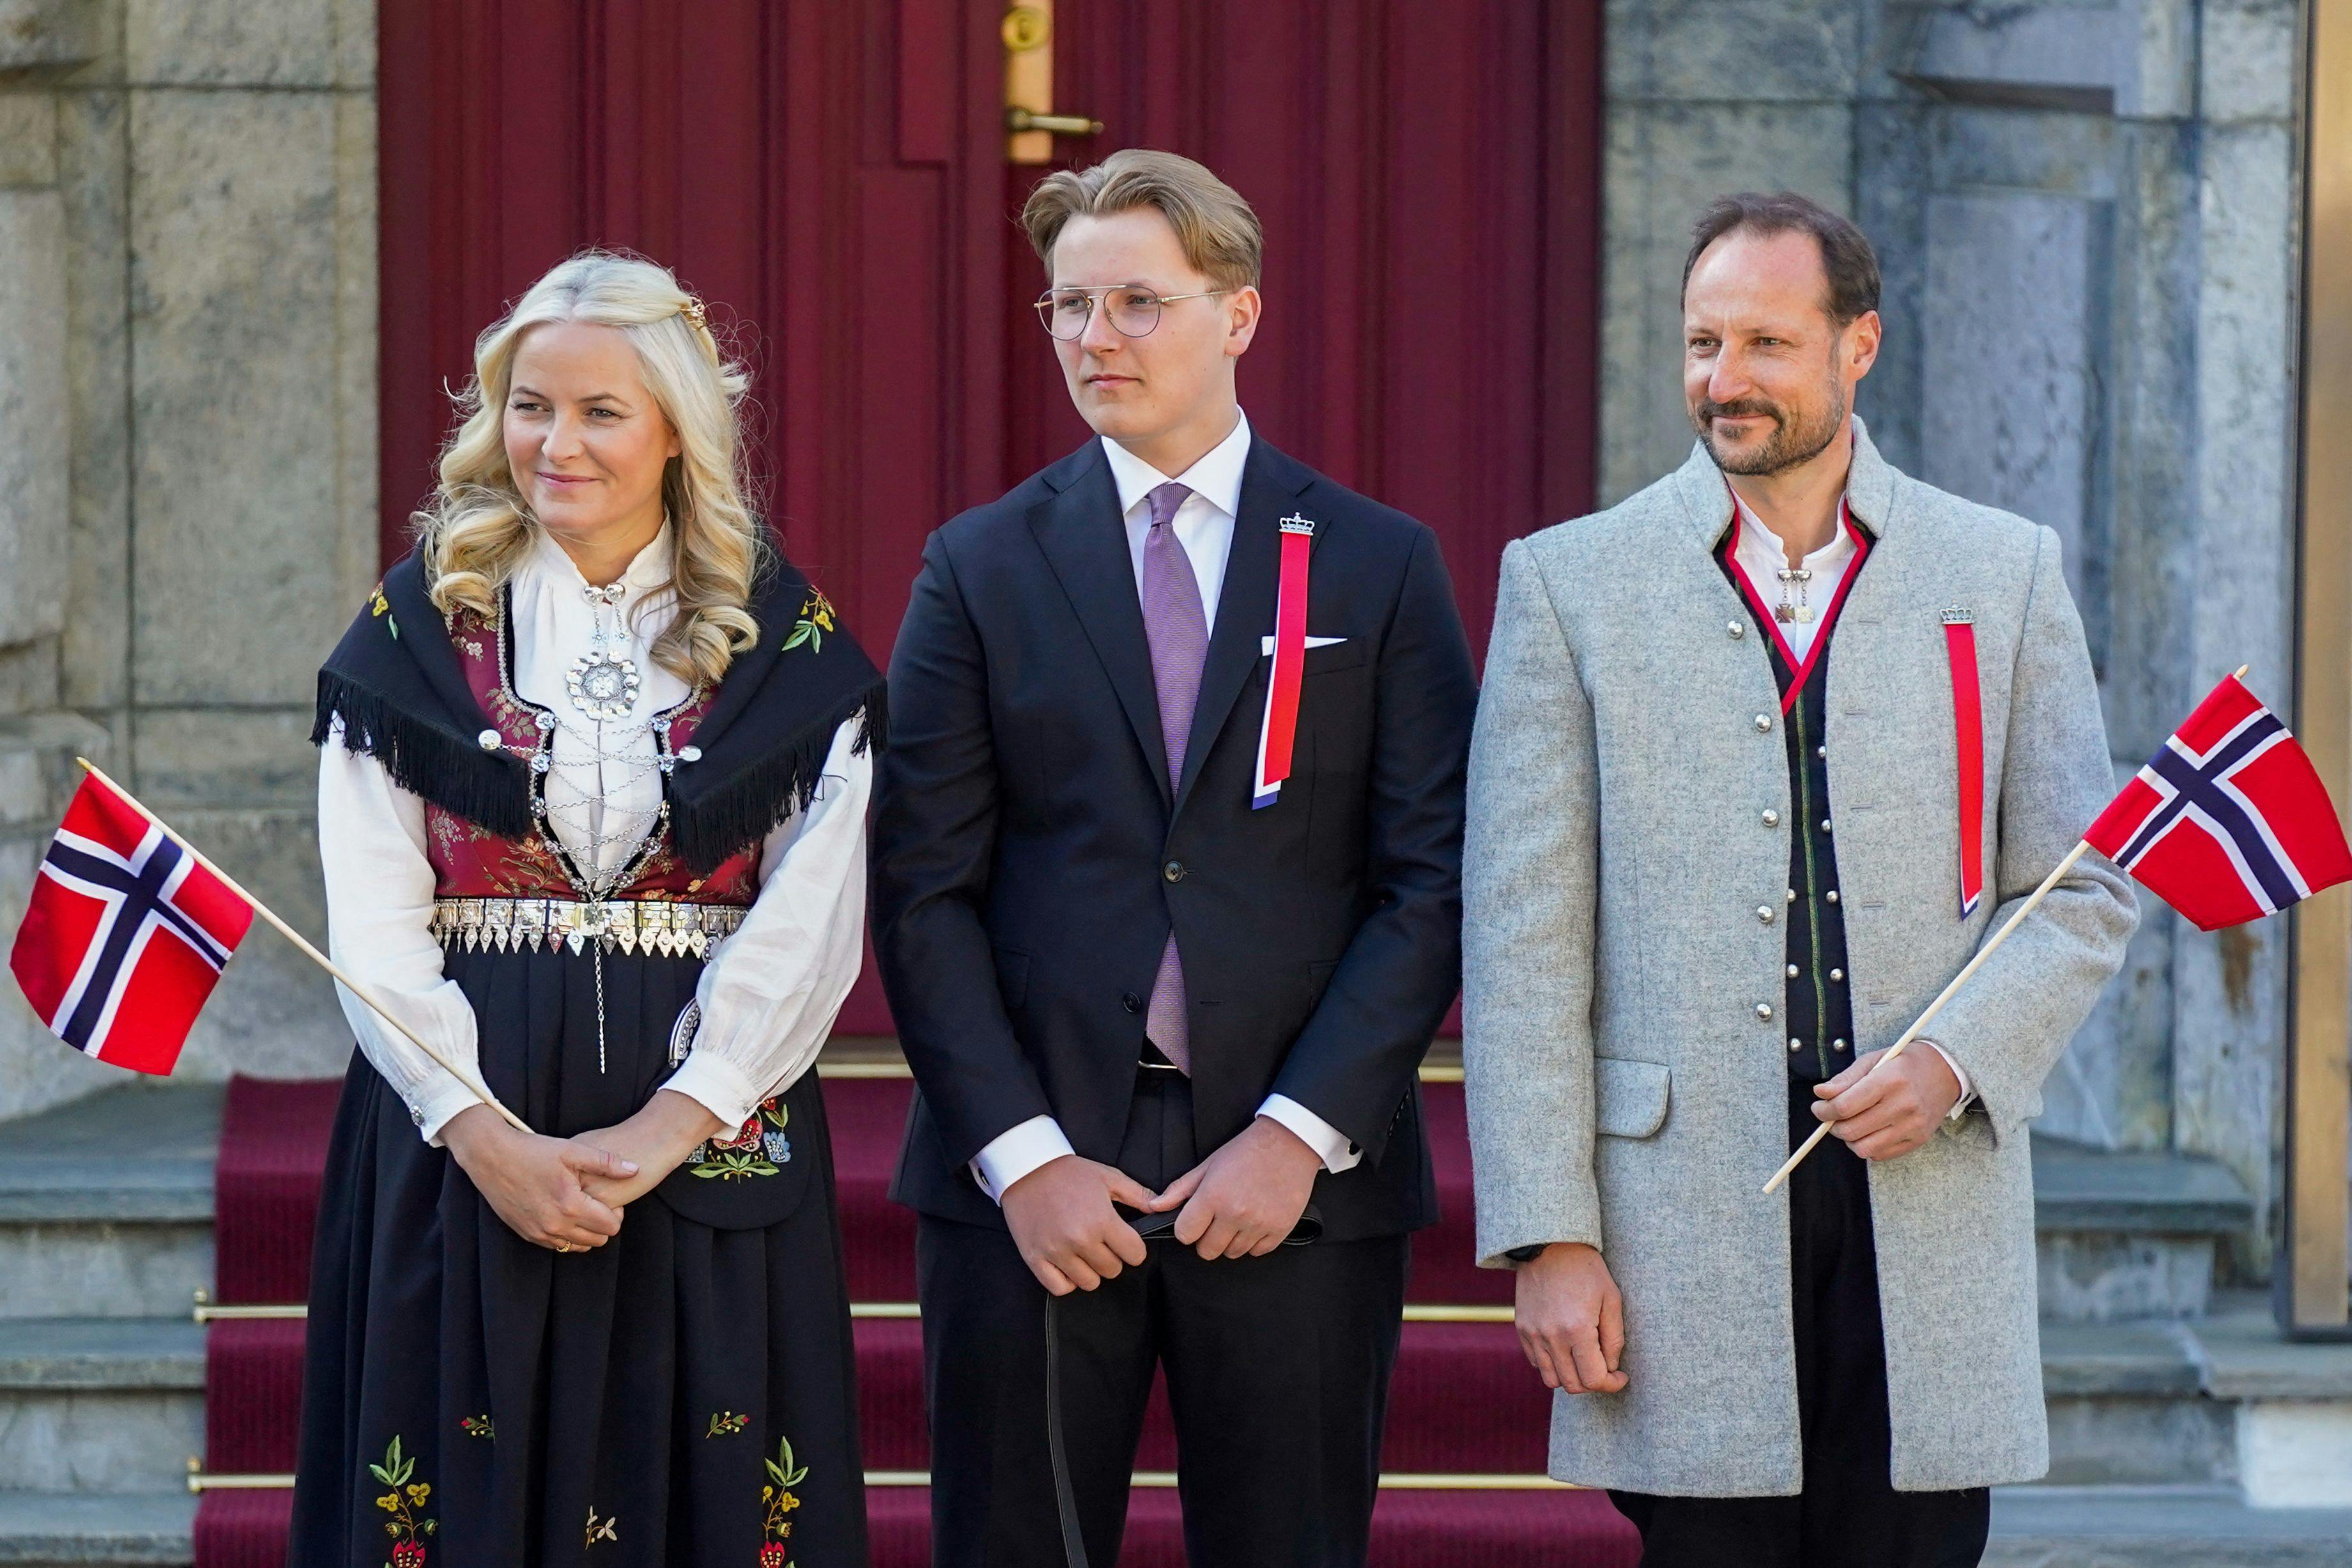 (L-R) Norway's Crown Princess Mette-Marit, Prince Sverre Magnus and Crown Prince Haakon greet and watch the children's parade during the May 17th celebrations at the royal residence Skaugum, in Asker, near Oslo.. (Photo by Lise Åserud / NTB / AFP) / Norway OUT